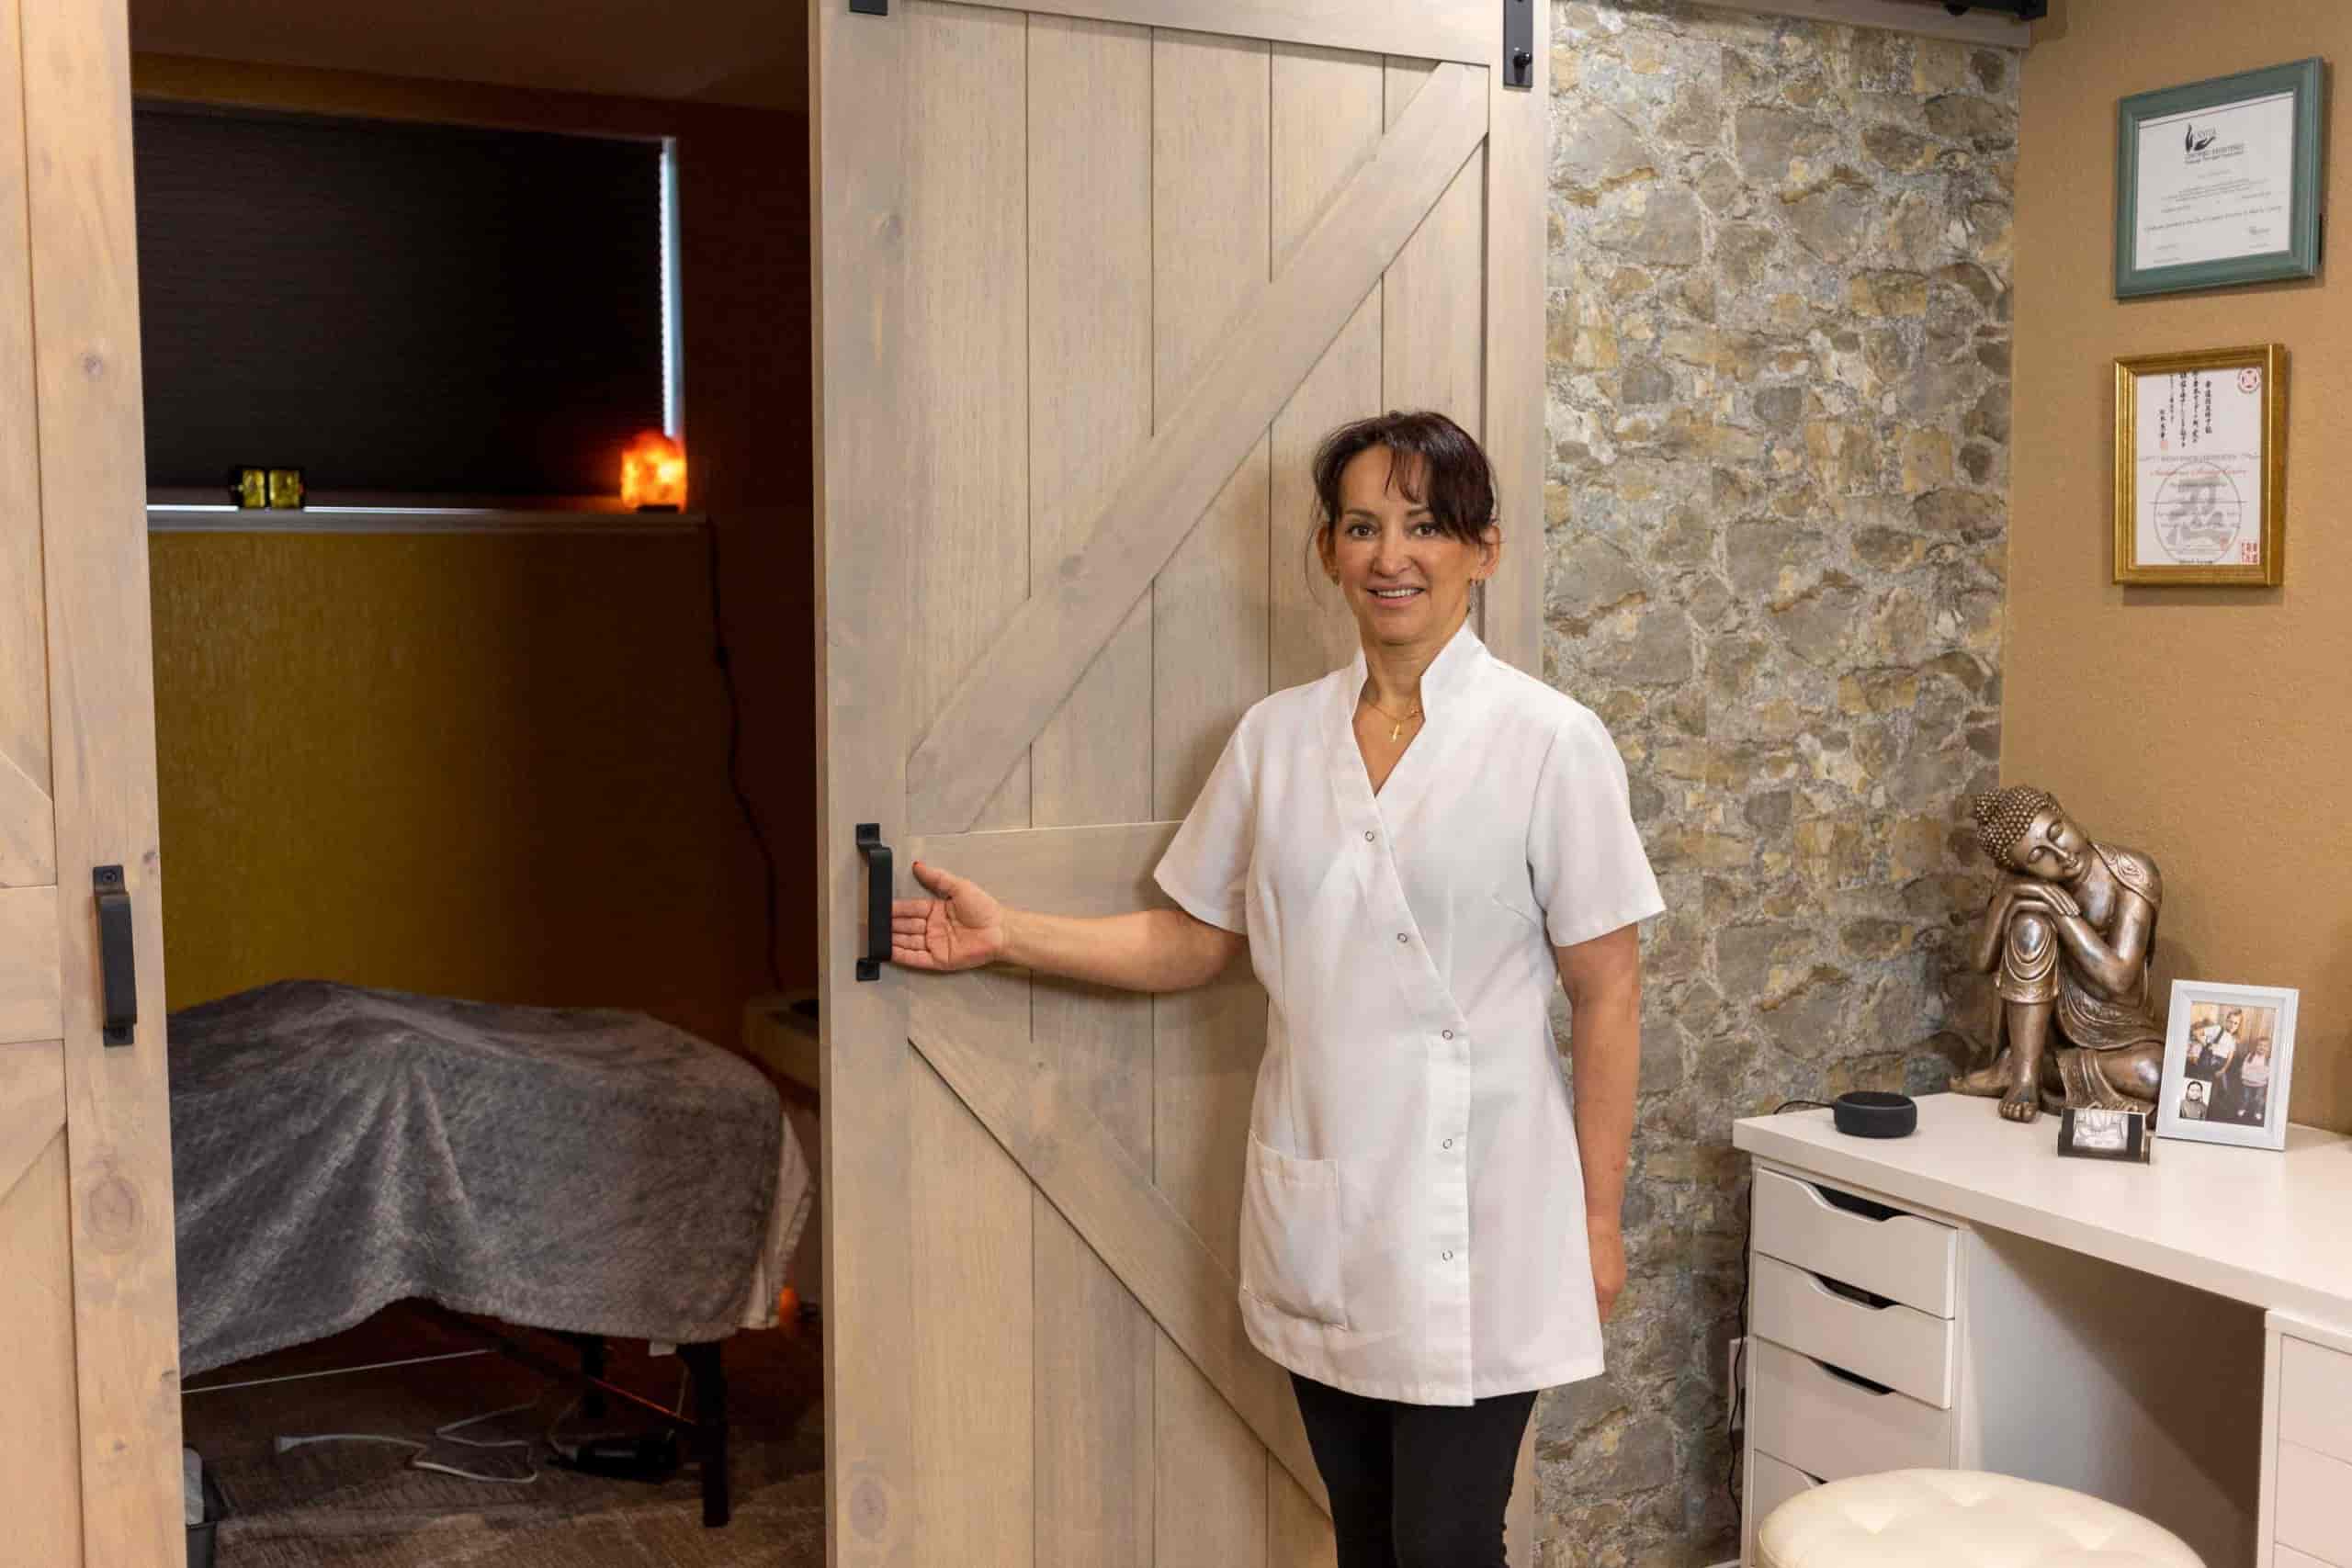 Lena, a licensed massage therapist in Calgary, alberta, stands in front of her barn style door leading to her massage therapy room in the basement of her home in Calgary, Alberta, Canada.